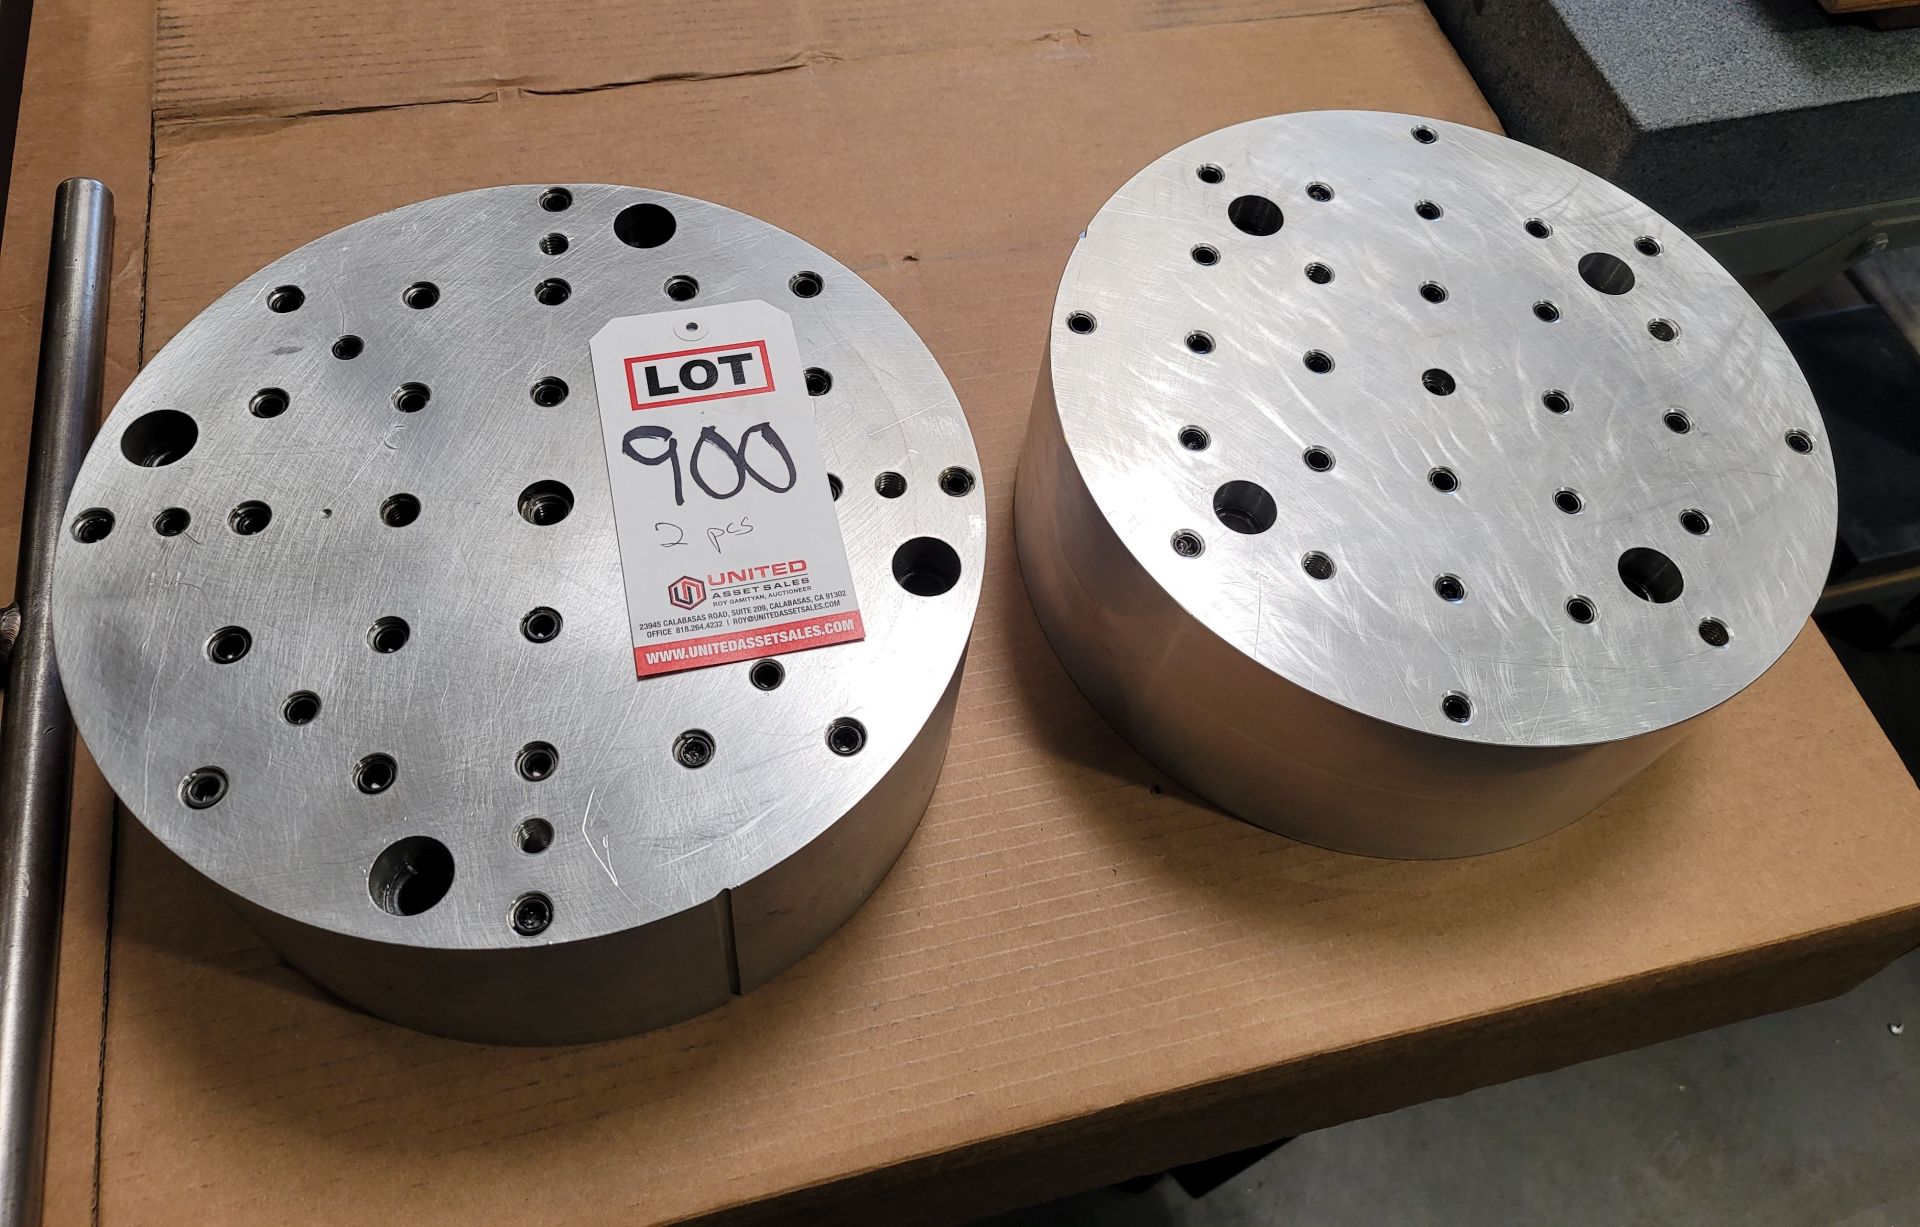 LOT - (1) 5" AND (1) 4-3/4" ALUMINUM RISERS, APPROX. 13" DIAMETER, FITS THE MAKINO CNC'S